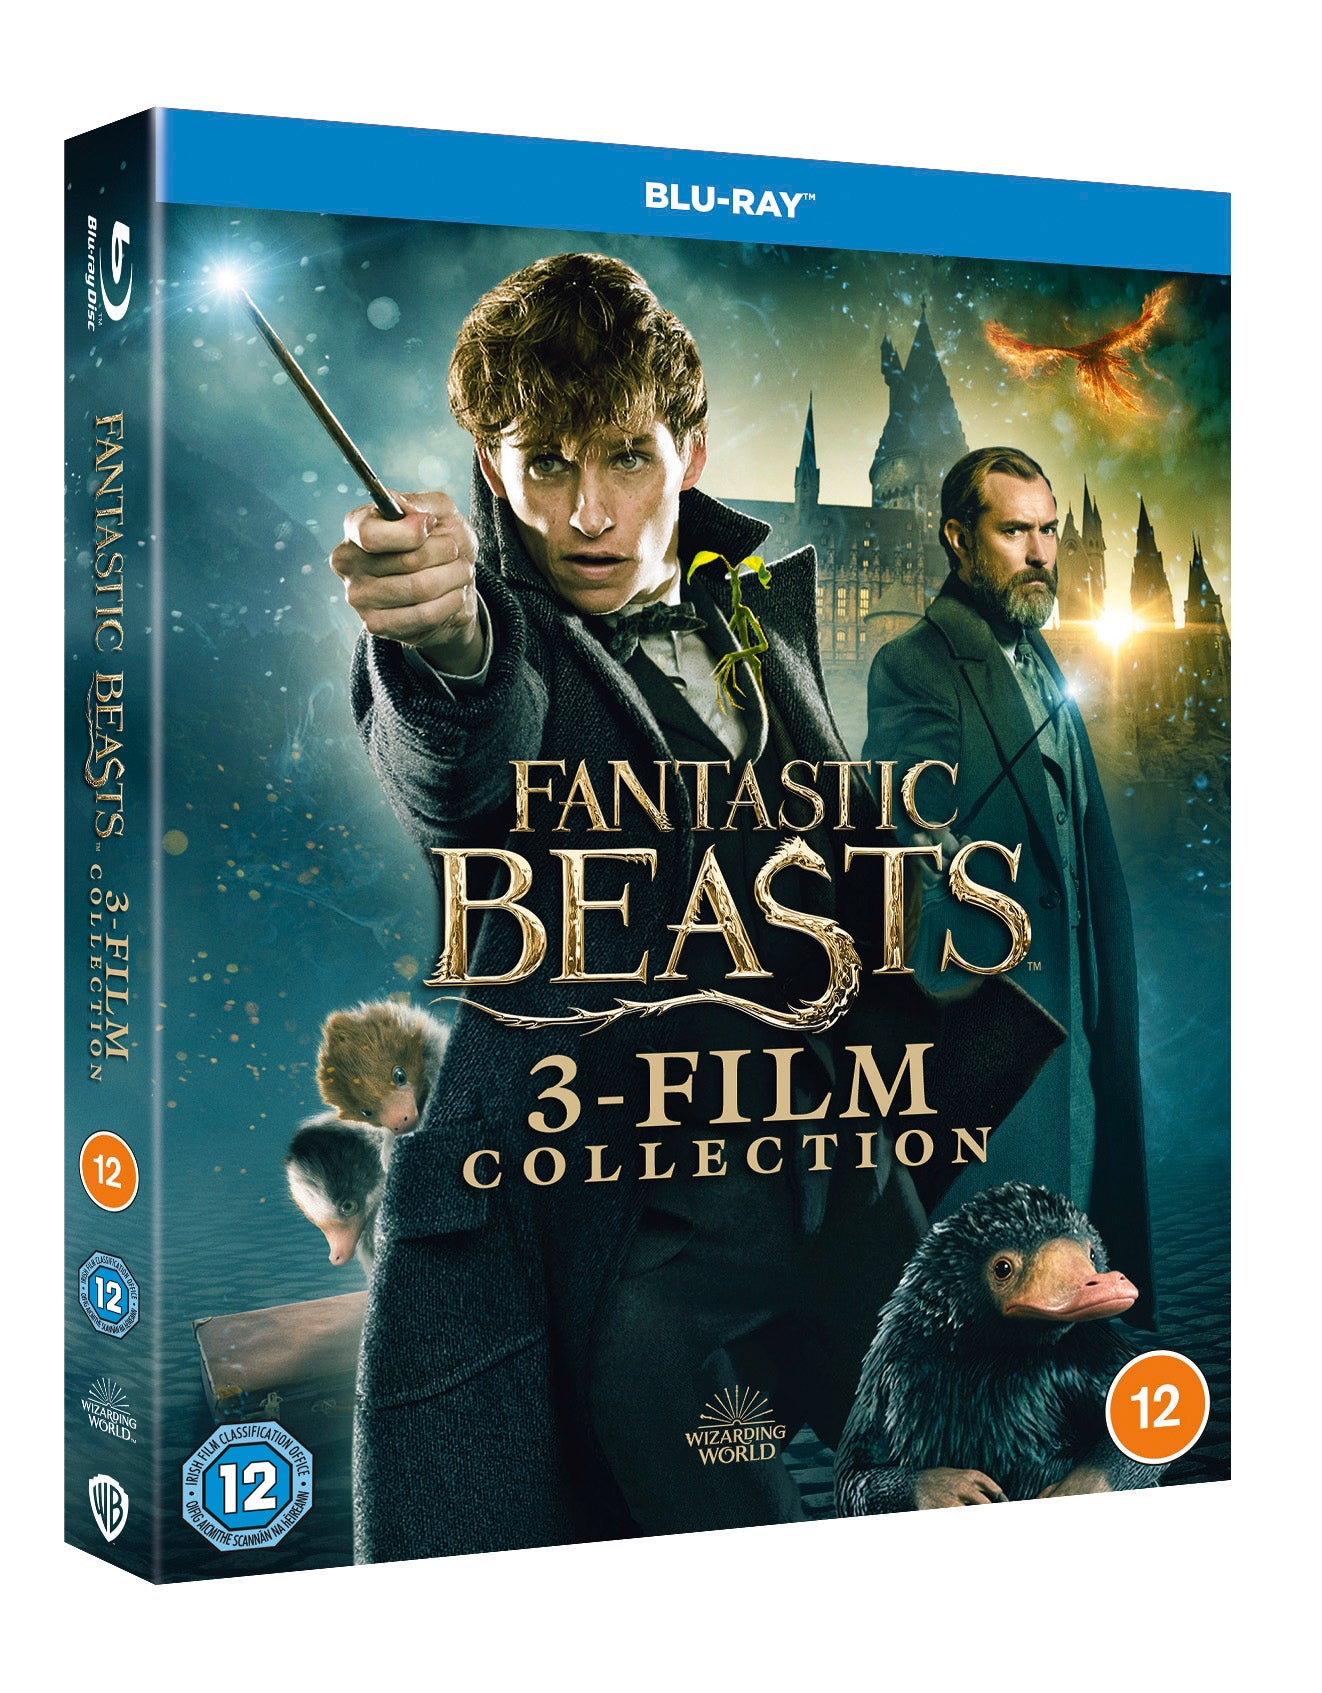 Fantastic Beasts 3-film Collection (Blu-Ray)